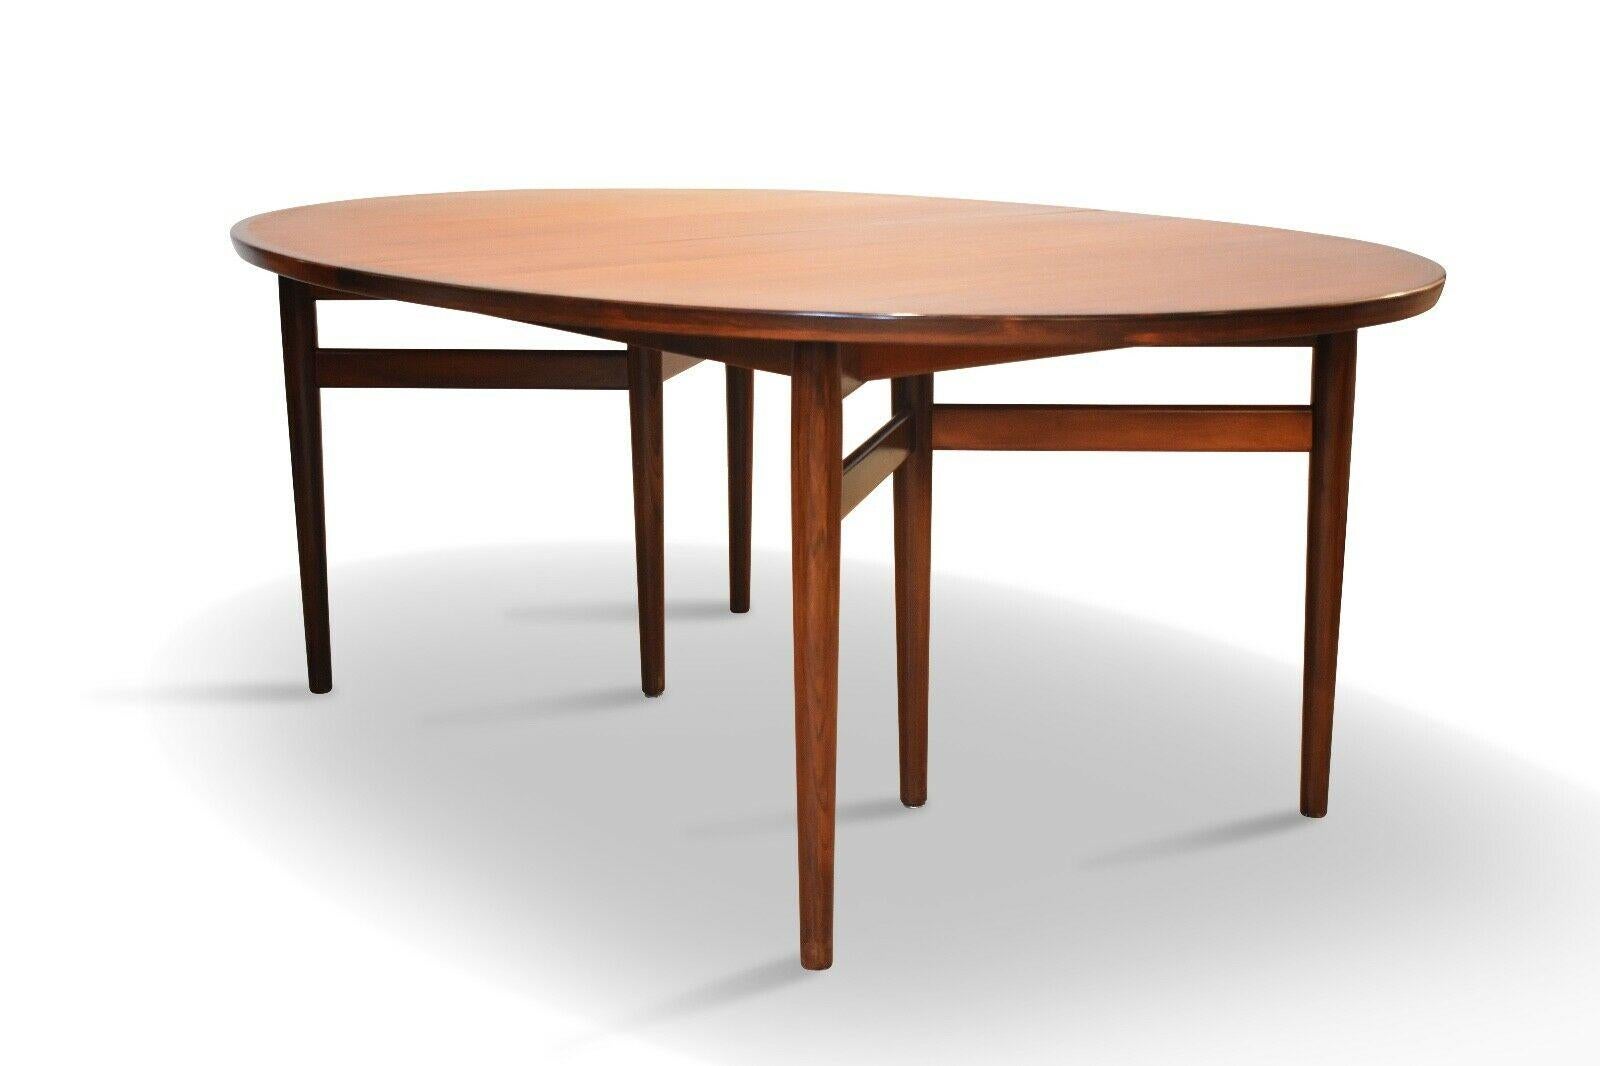 Mid-20th century elliptical oval dining / conference table model 212 in rosewood designed by Arne Vodder and produced by Sibast møbelfabrik in Denmark.

This table is of very high quality and hand built in Denmark, comprising of two leaves and